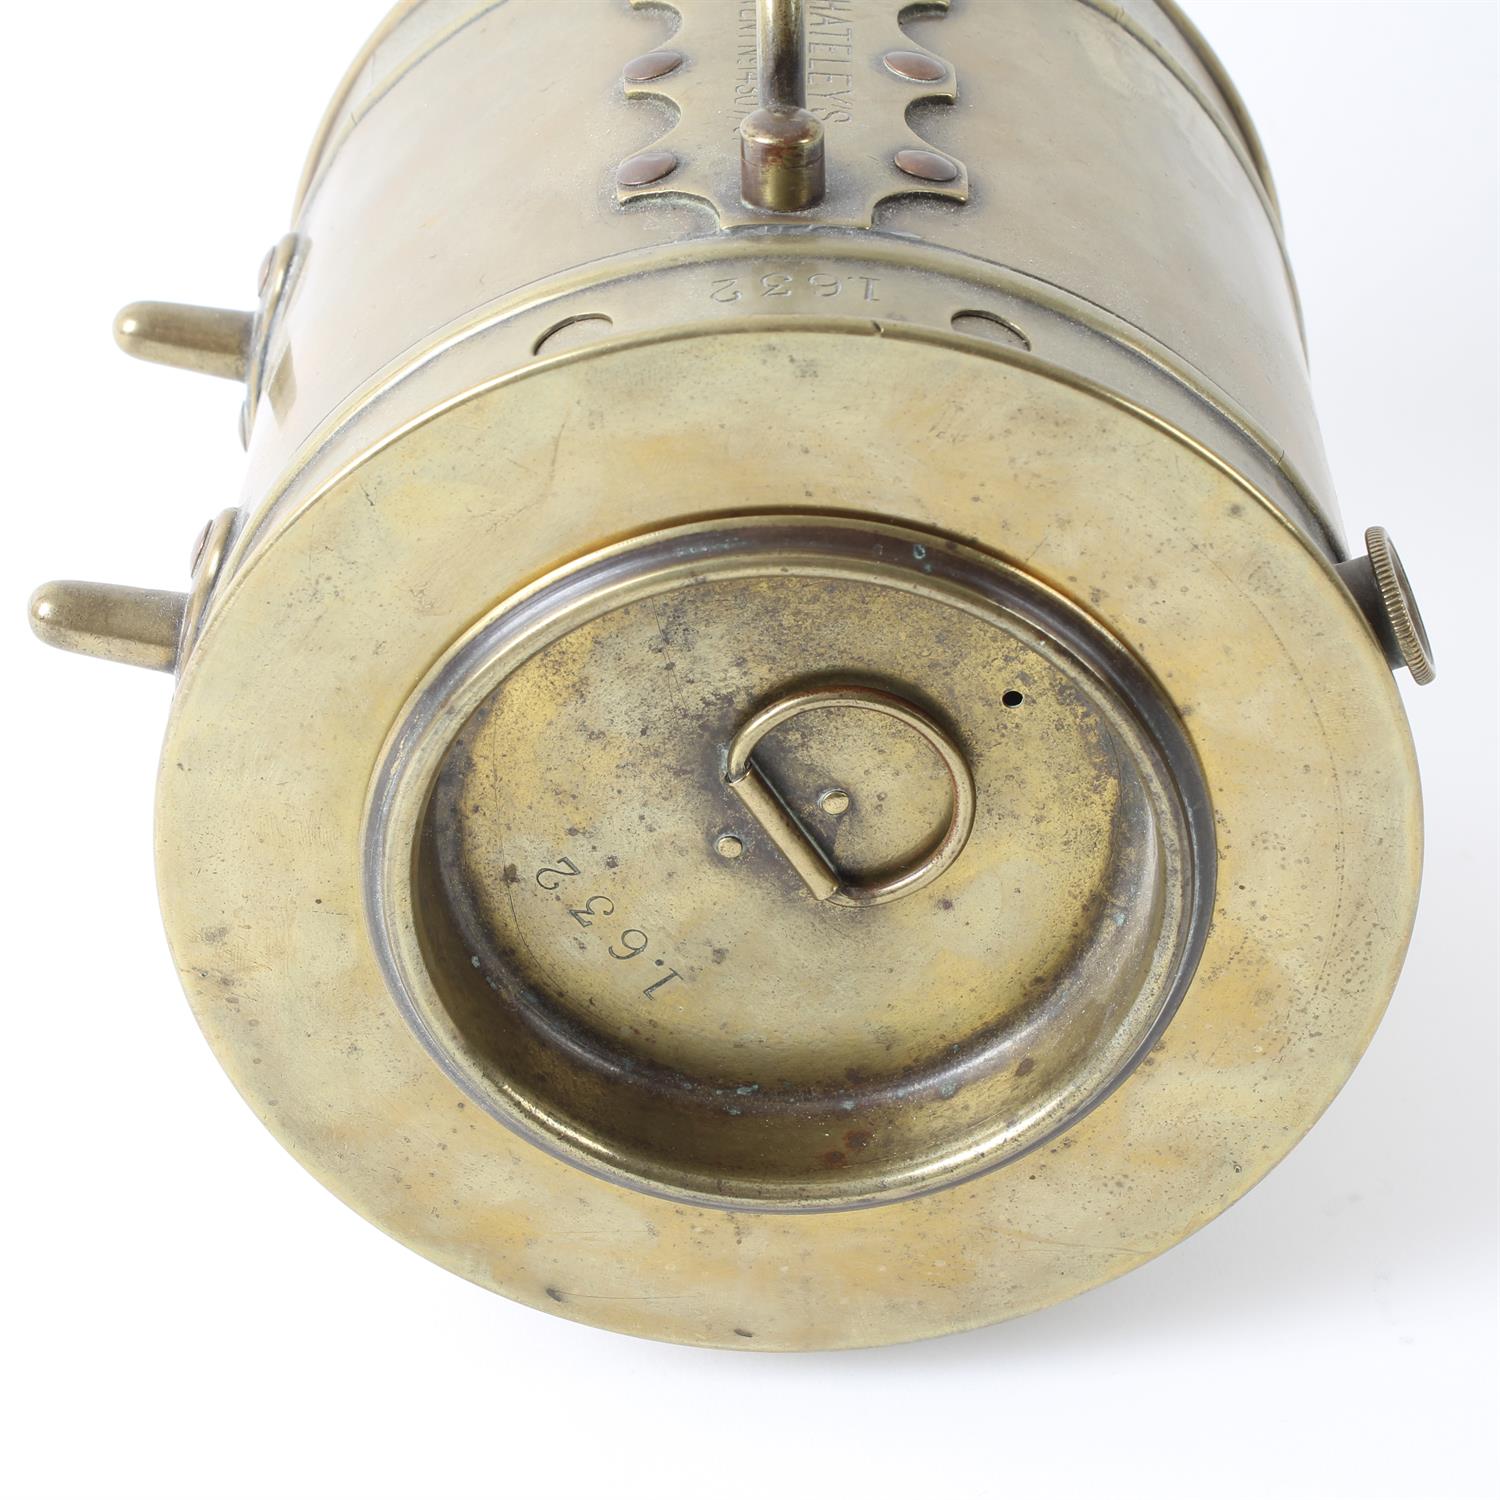 Turner's Patent brass-cased Homing Pigeon clock - Image 6 of 6